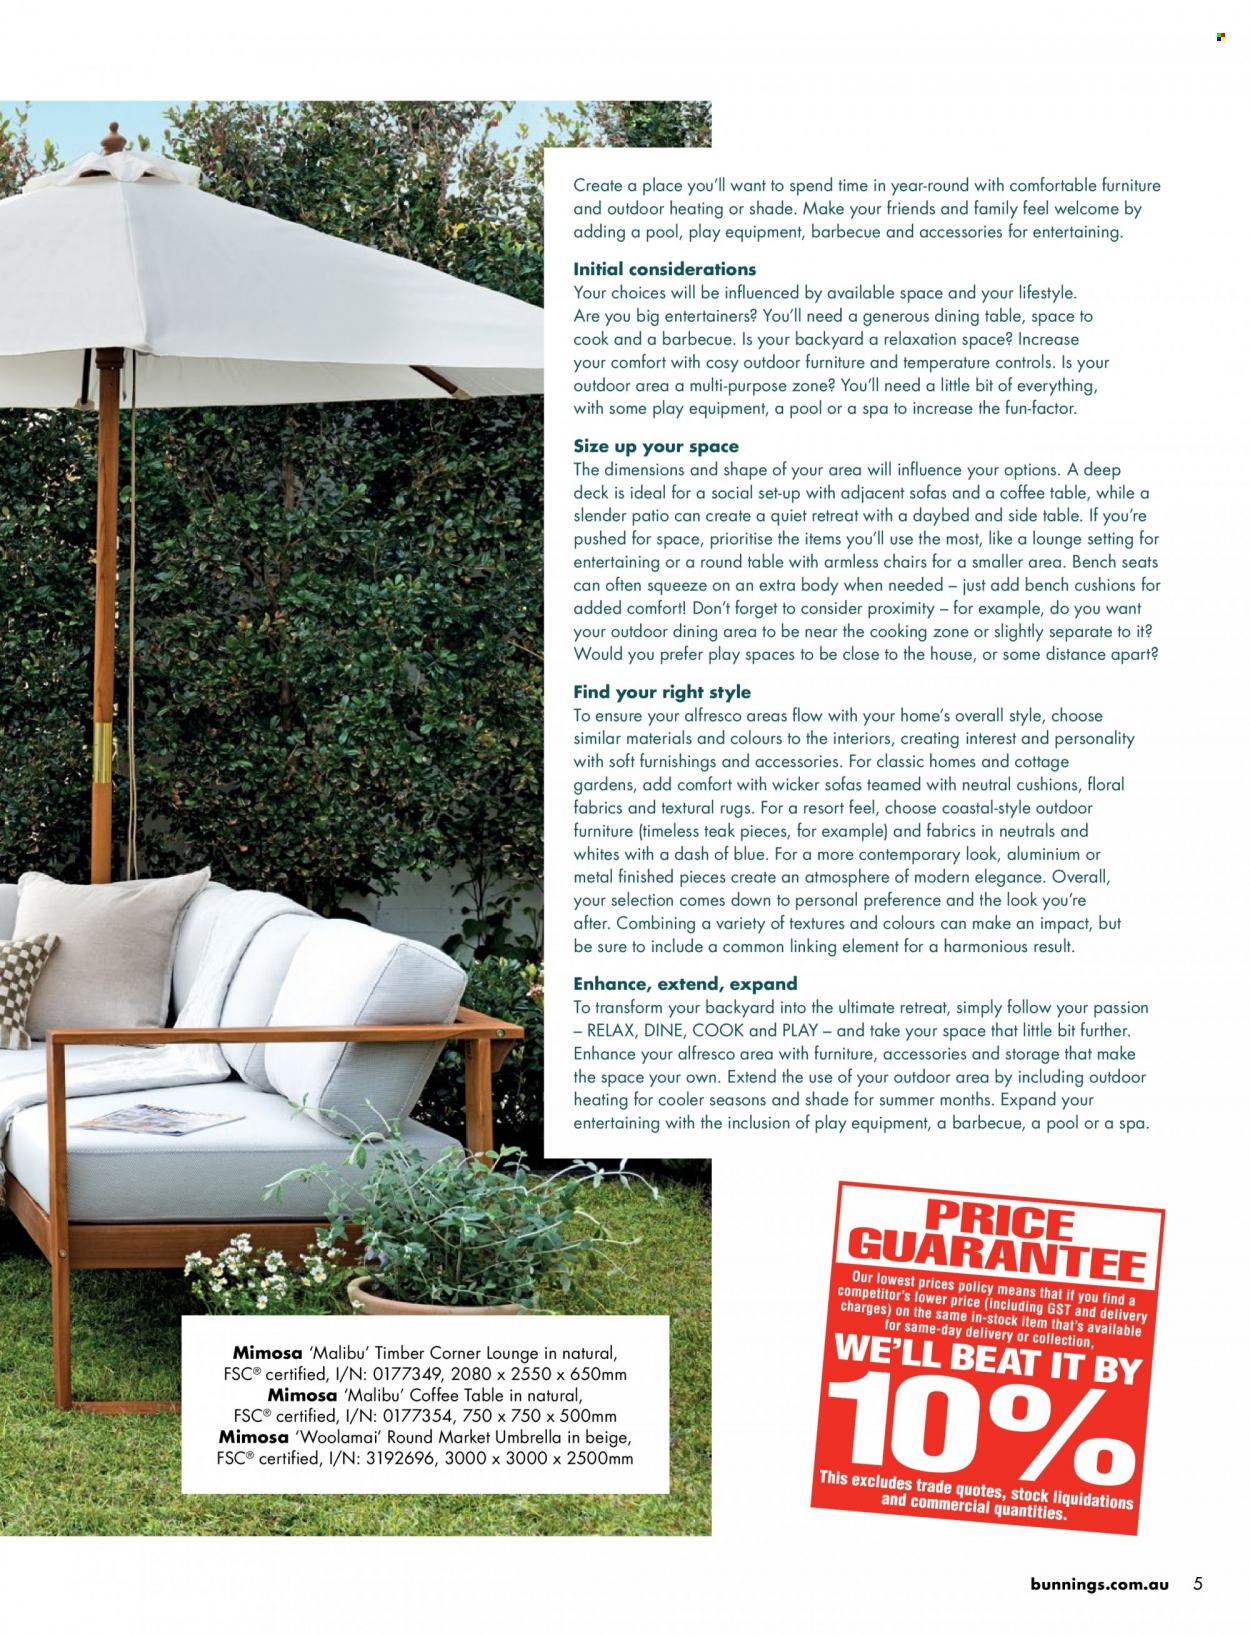 thumbnail - Bunnings Warehouse Catalogue - Sales products - dining table, table, chair, bench, sofa, lounge, coffee table, sidetable, daybed, outdoor furniture, cushion, bench cushion, rug, umbrella, parasol. Page 5.